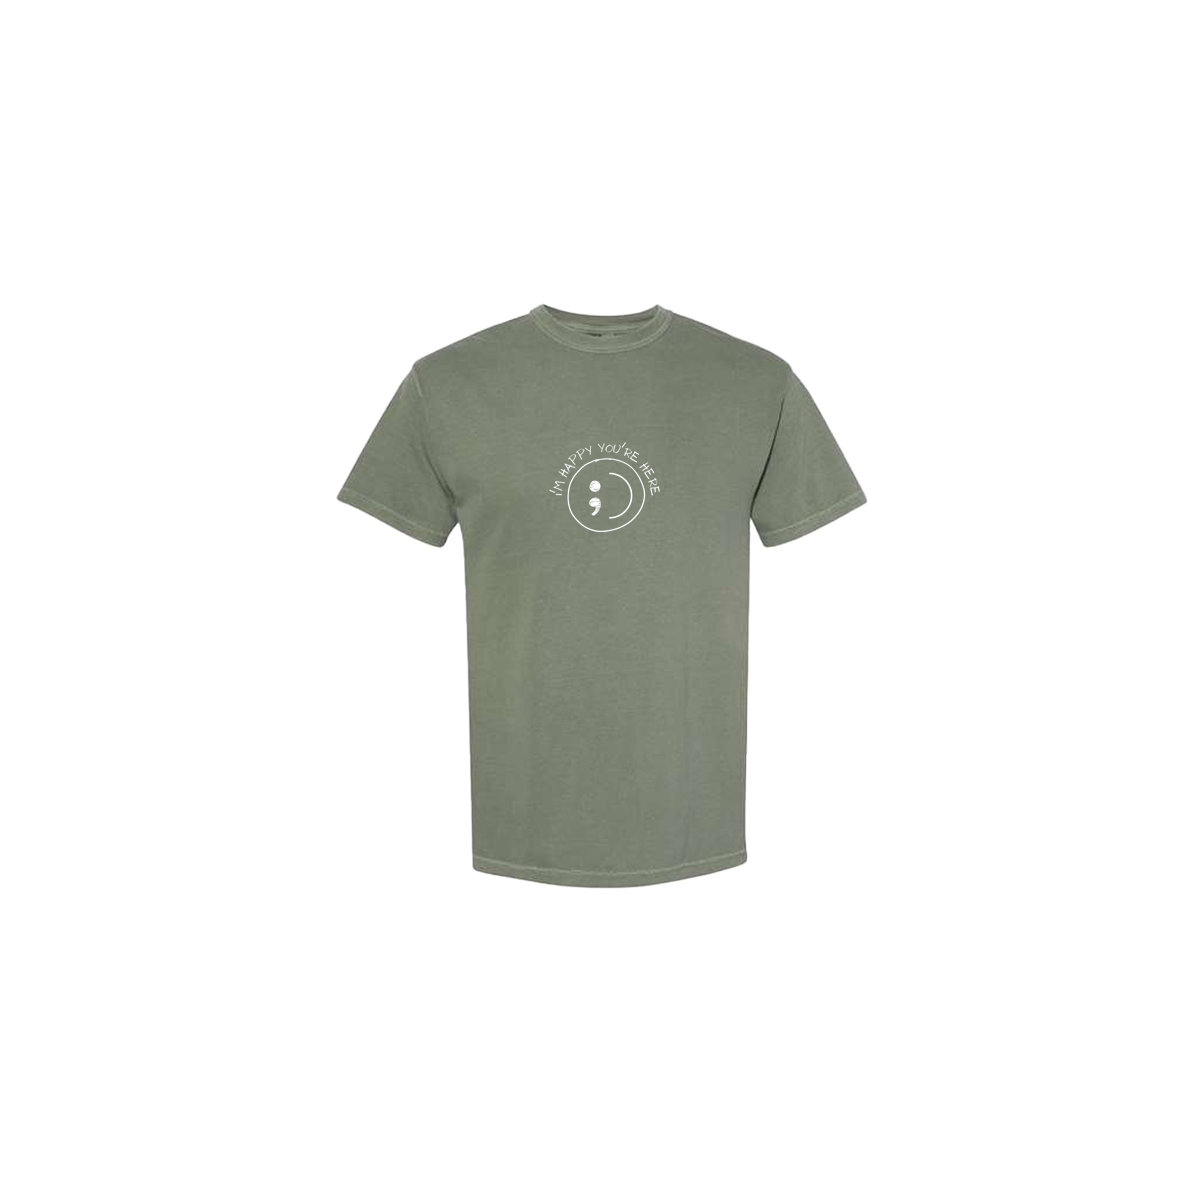 I'm Happy You're Here Embroidered Army Green Tshirt - Mental Health Awareness Clothing